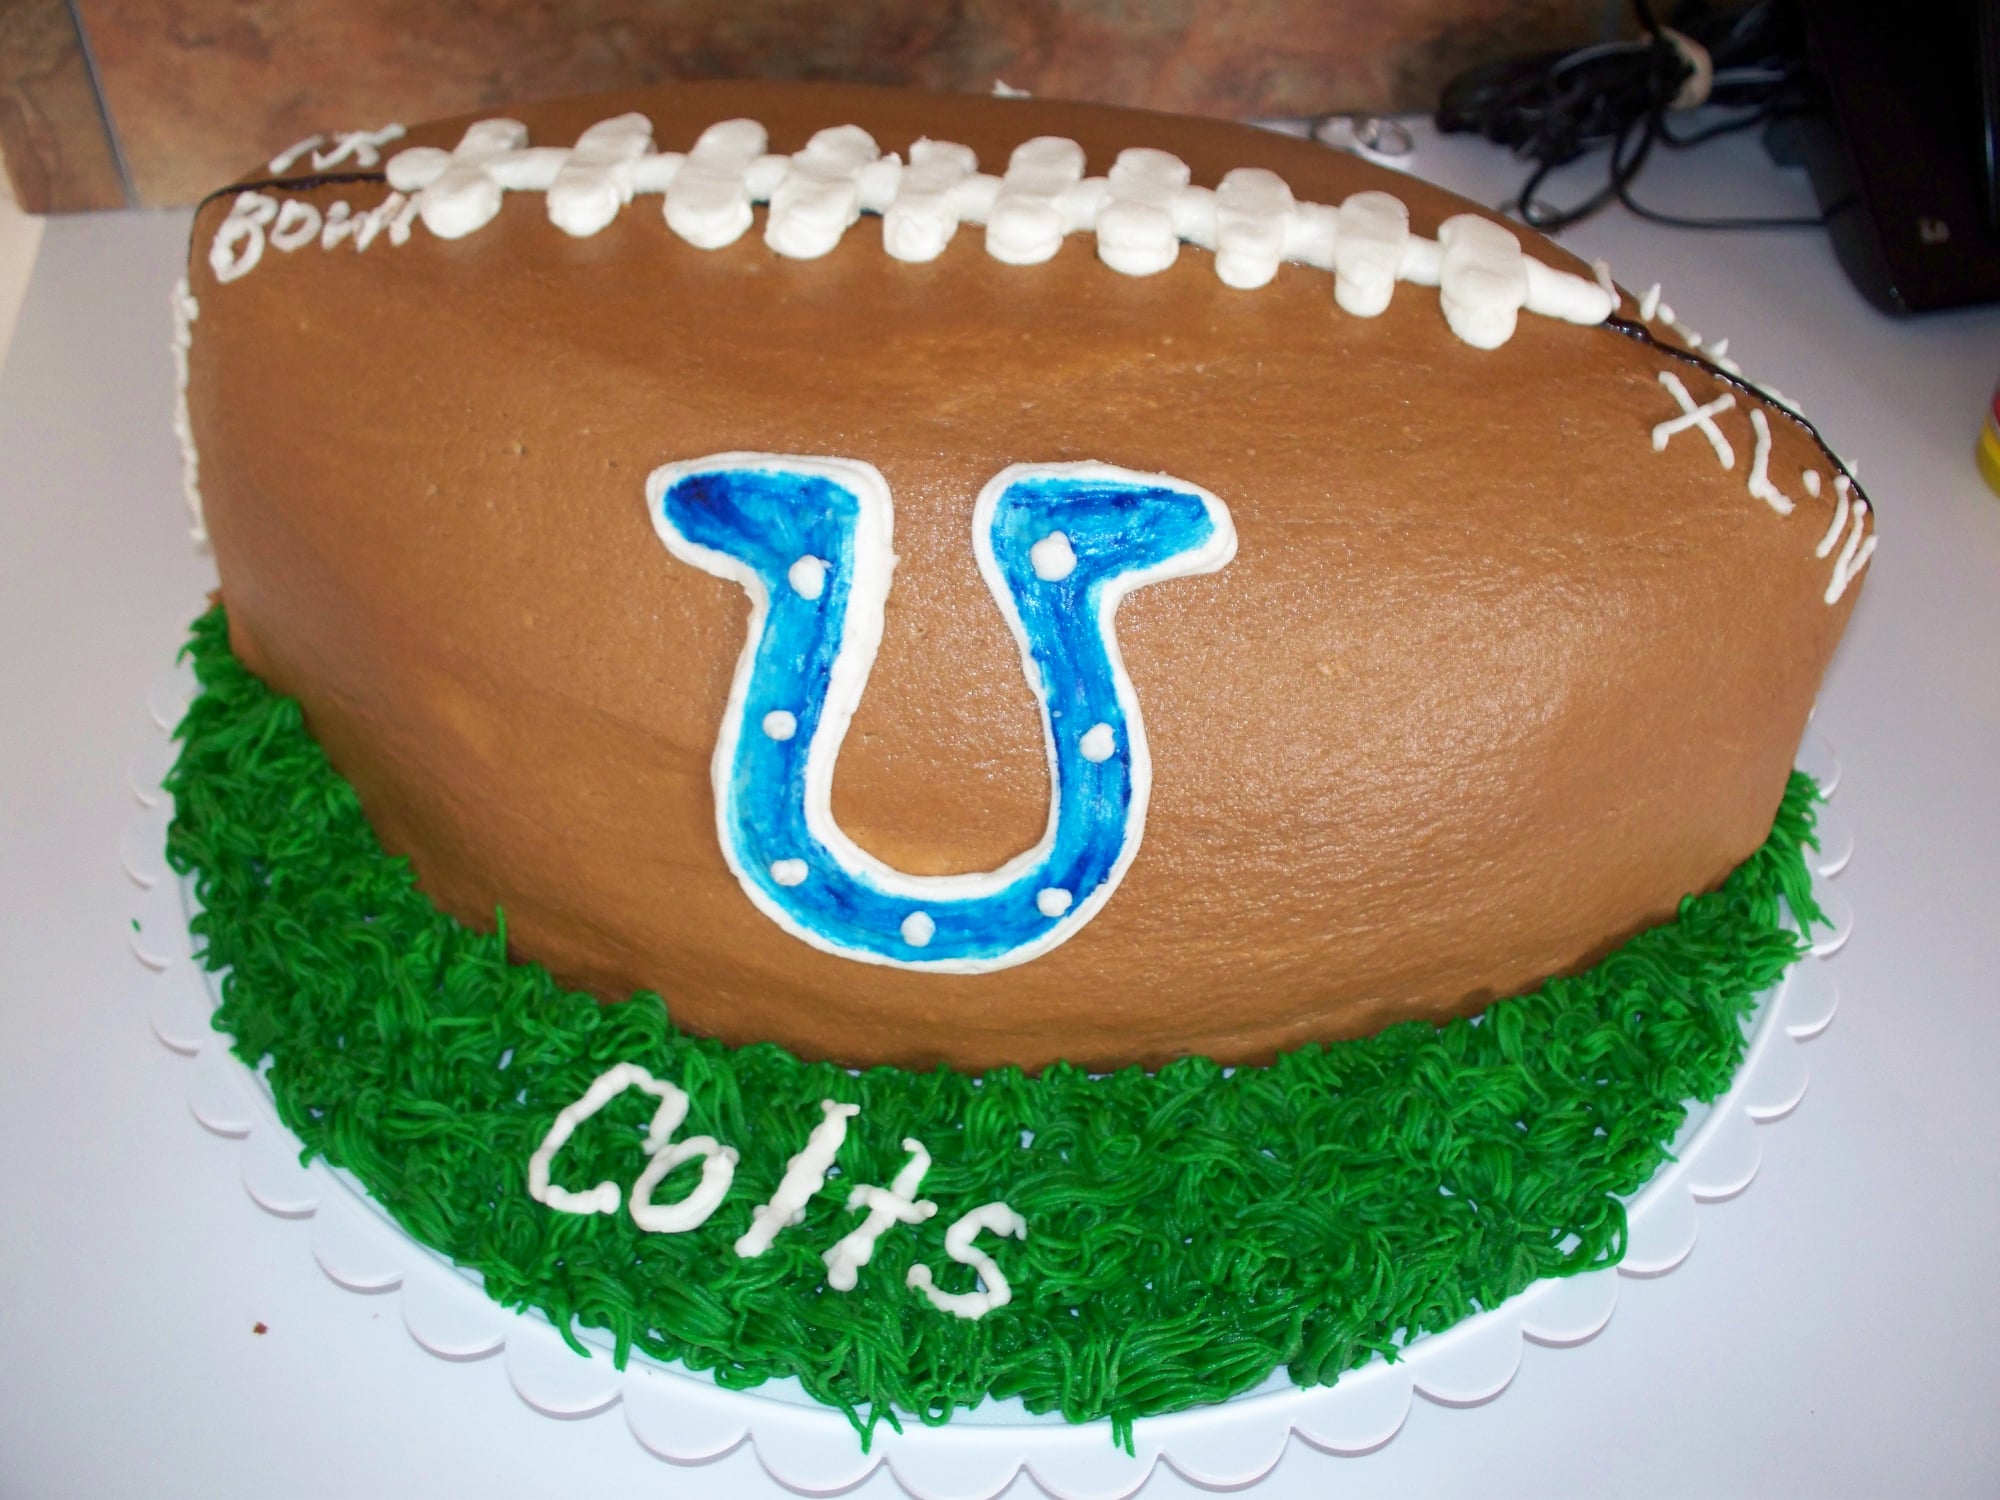 Custom indianapolis colts football cake. Made by Nan's Nummies